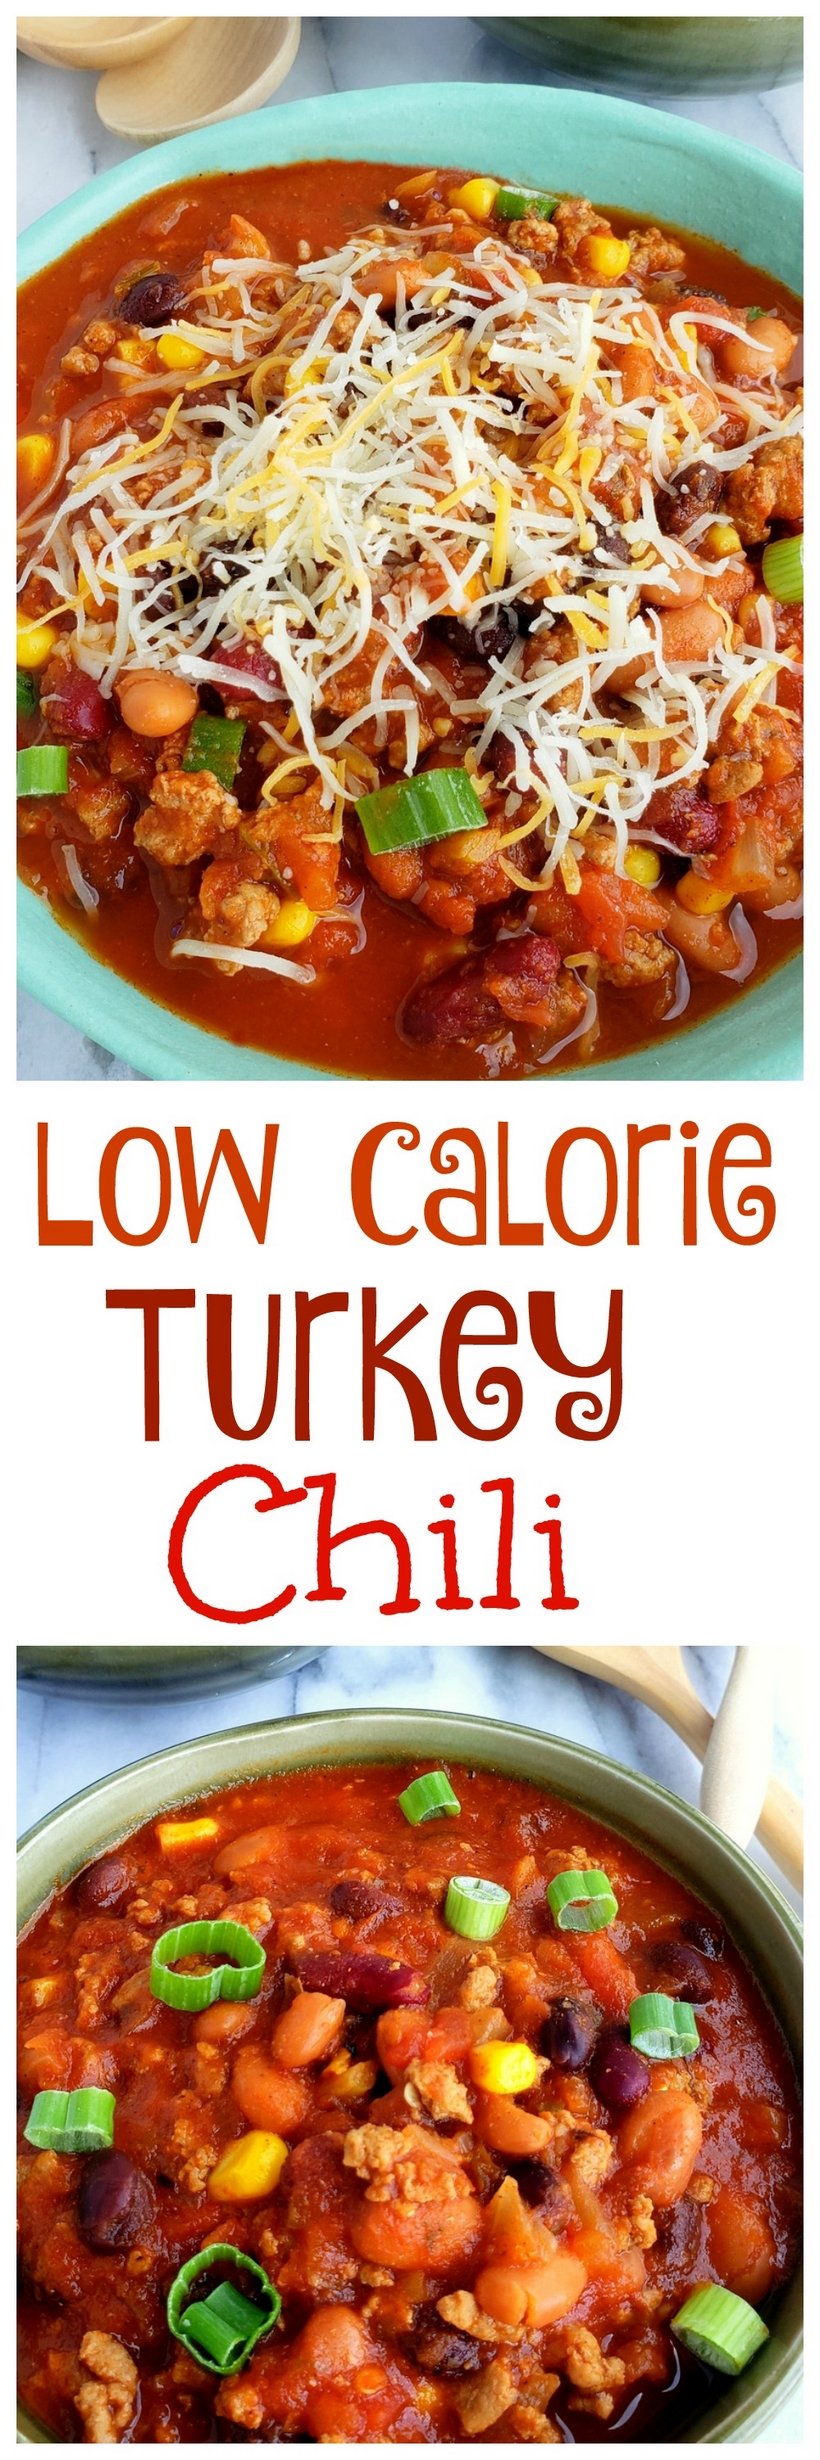 This Low Calorie Turkey Chili is so jammed with flavor, you'll forget you are eating something healthy. #turkeychili #healthydinner